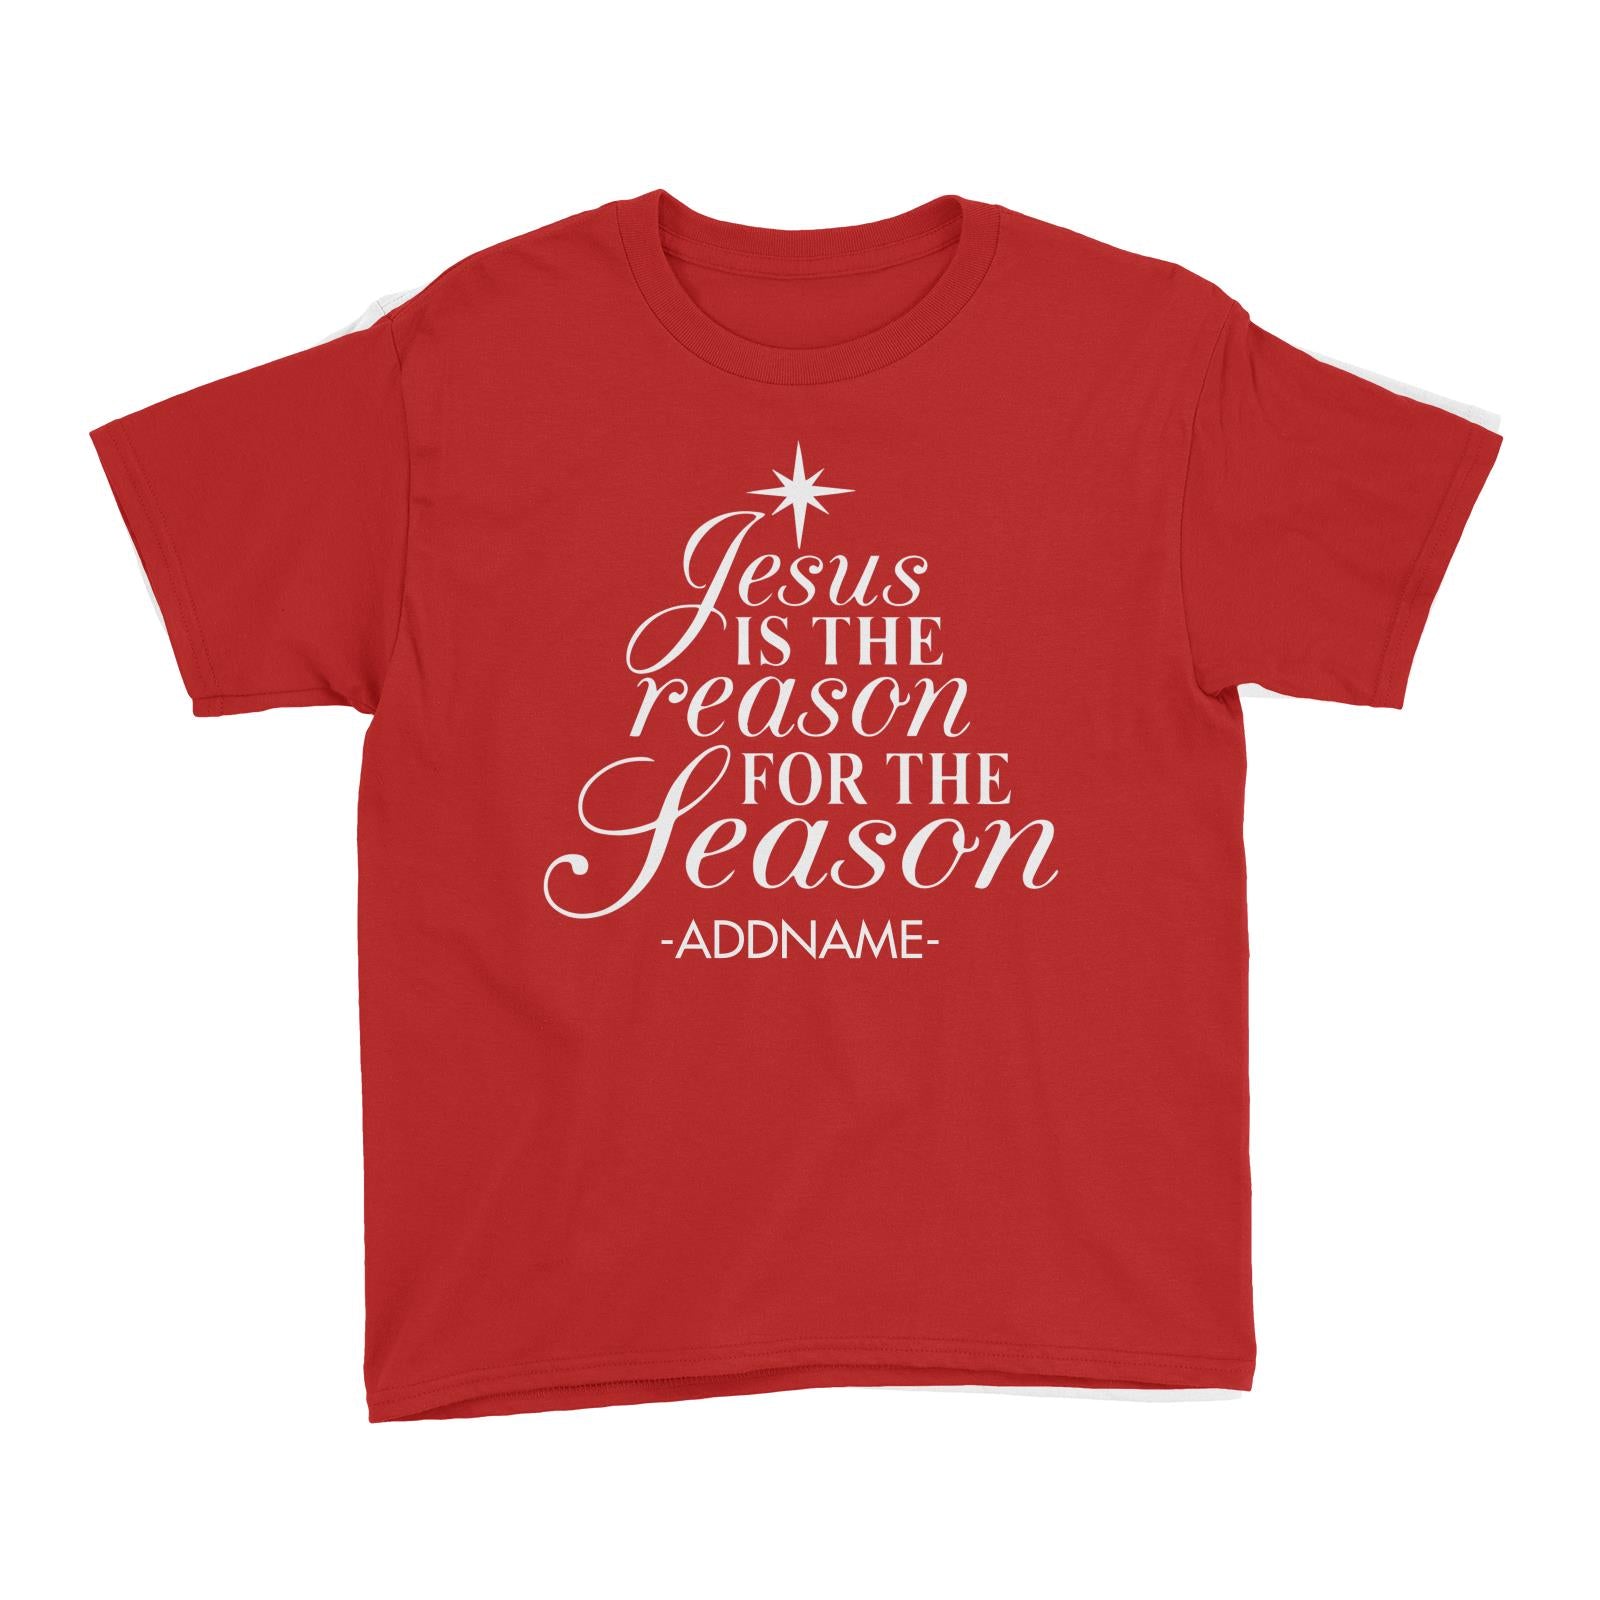 Jesus Is The Reason For The Season Addname Kid's T-Shirt Christmas Personalizable Designs Lettering